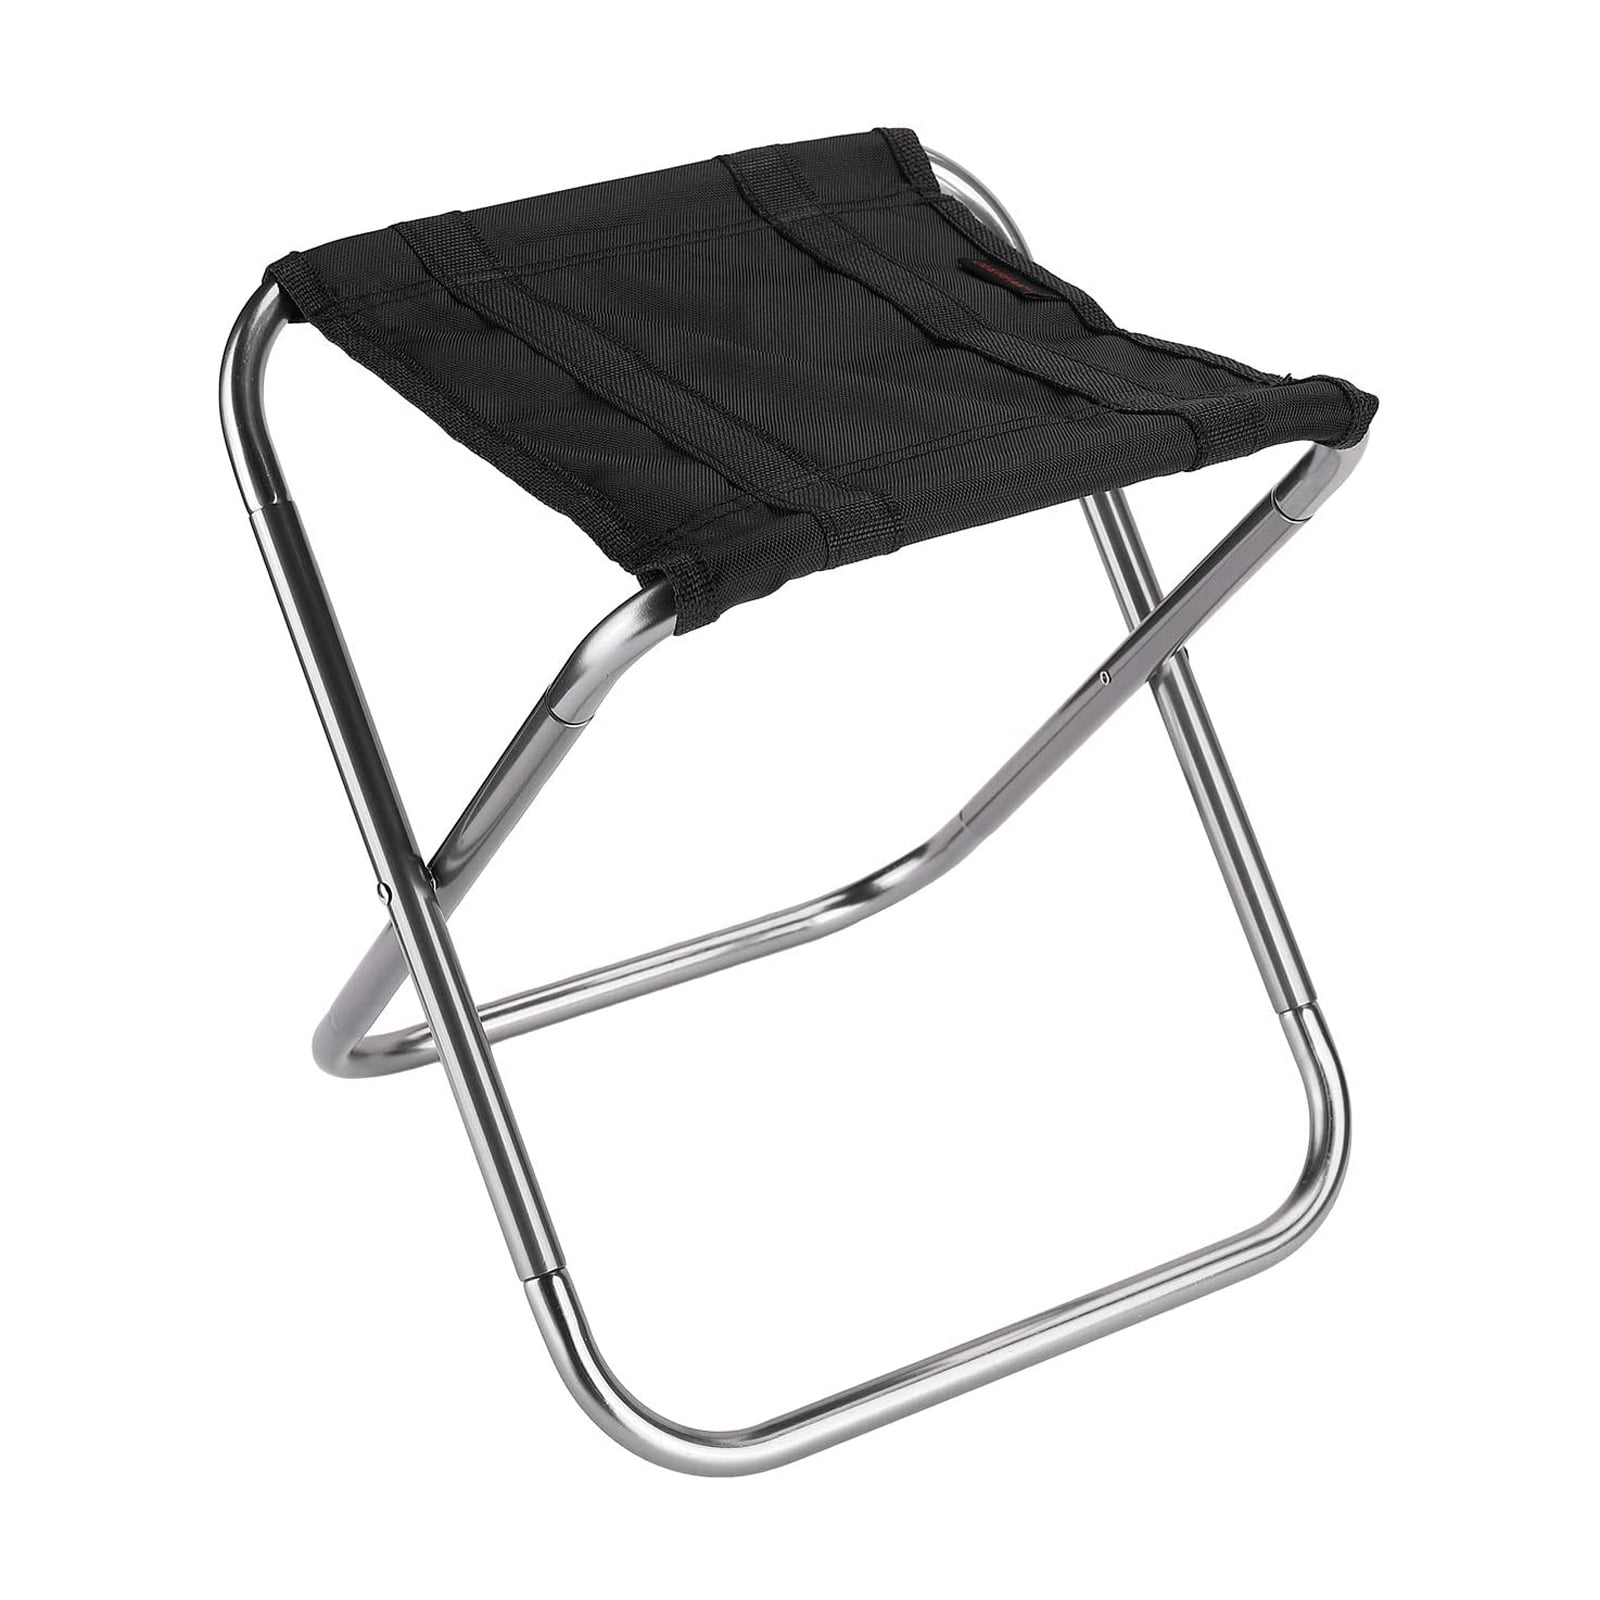 Portable Folding Chair Foldable Stool Seat Aluminum for Fishing Camping Hiking 